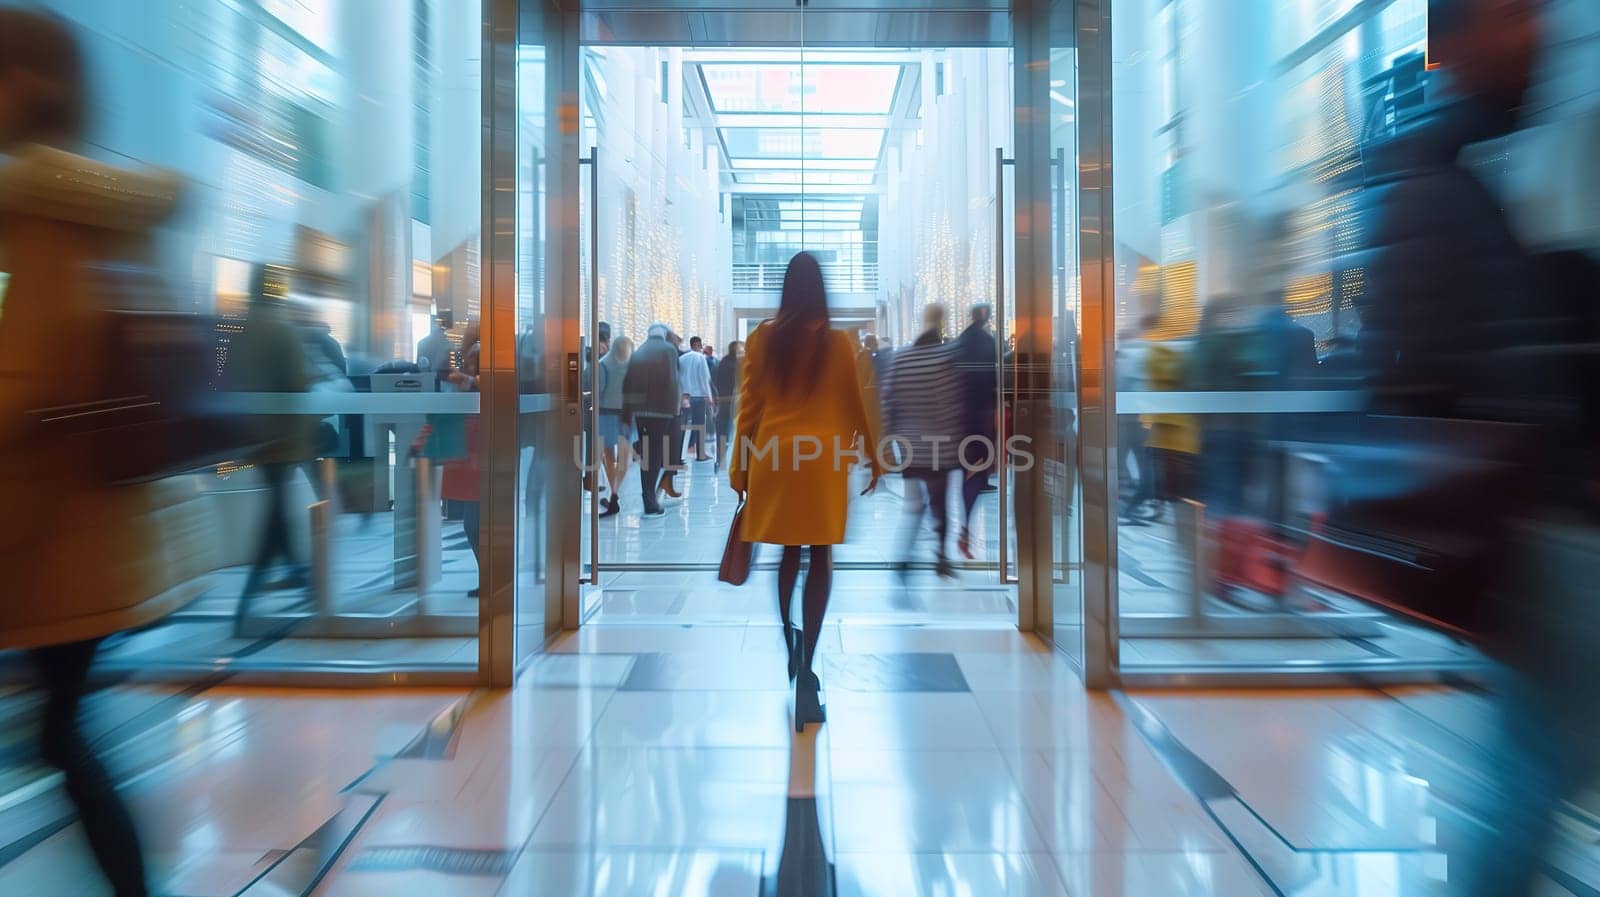 A woman, blurred in motion, walks down a hallway in a business setting. The surroundings are indistinct, emphasizing her movement through the space.